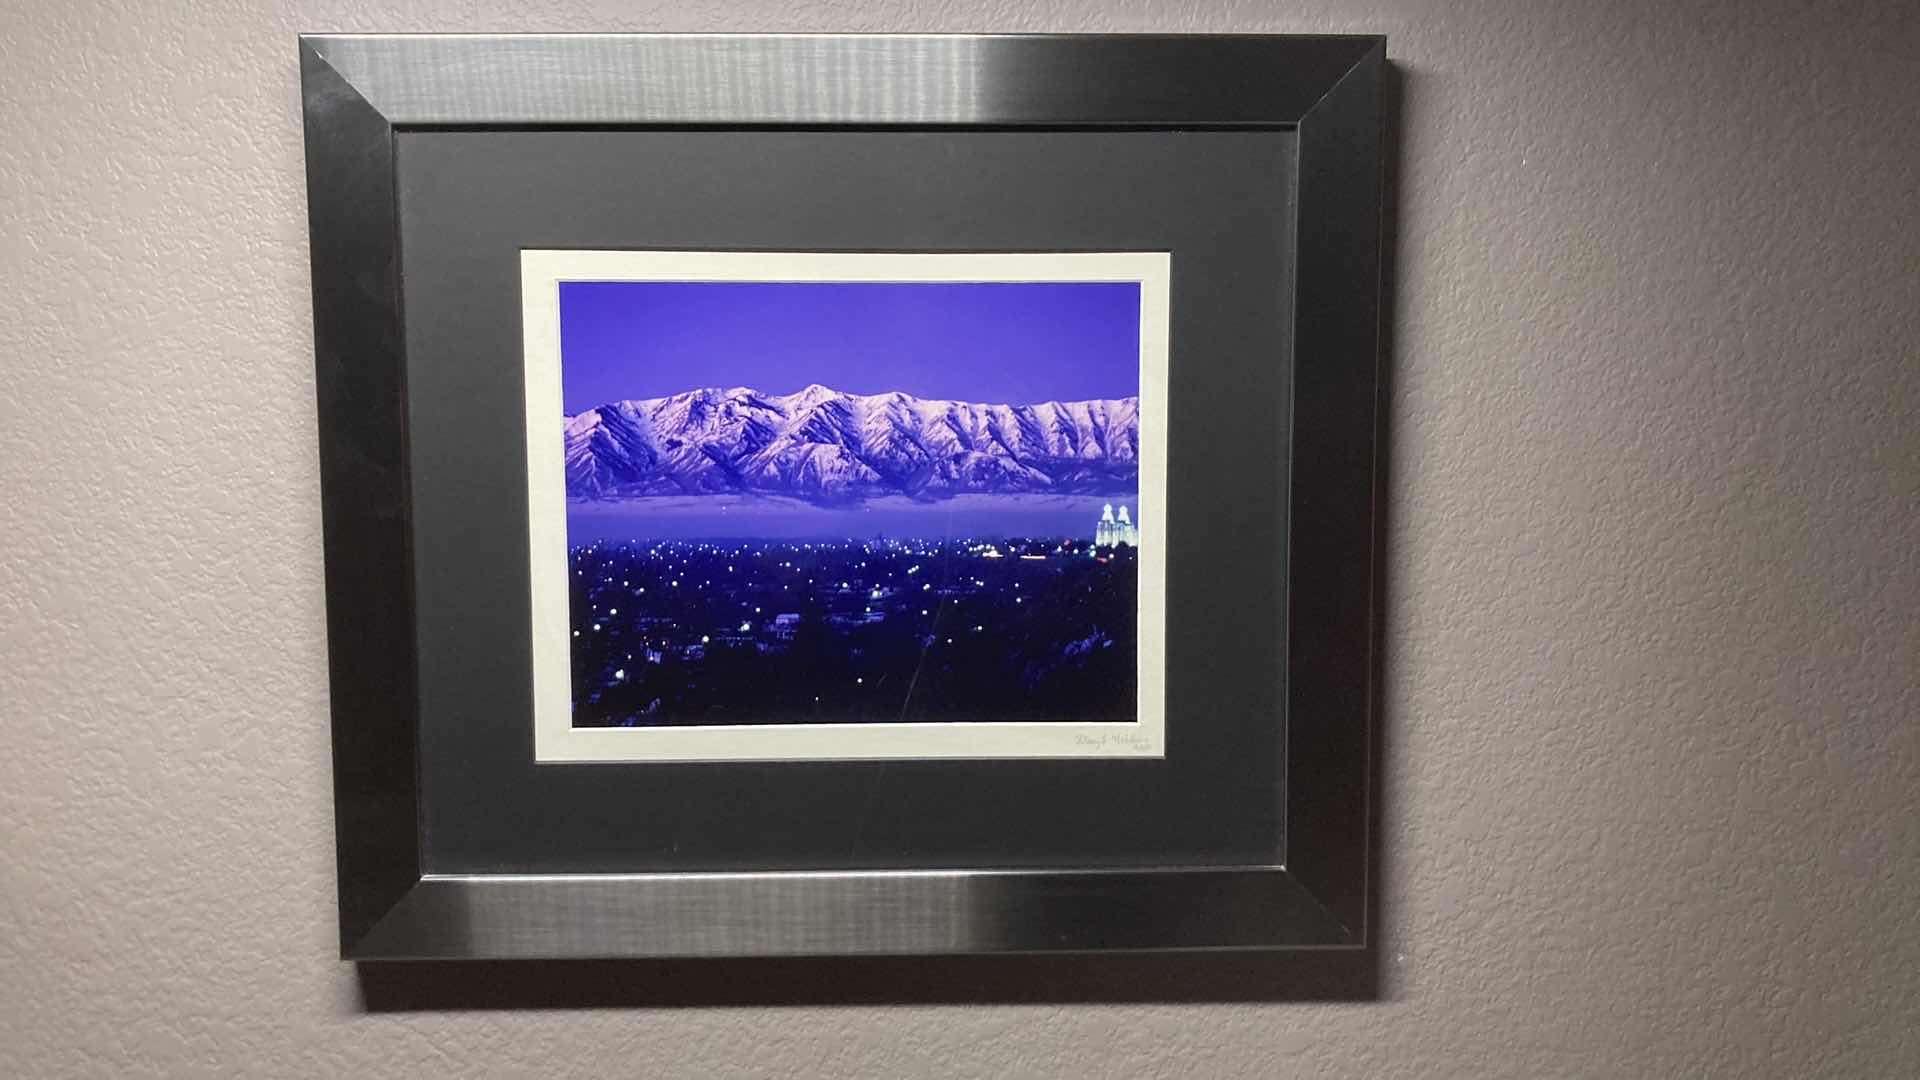 Photo 1 of SNOWY MOUNTAINS OVER CITY FRAMED PHOTOGRAPH BY TRACI L. NIELSEN 10/50 24.5” X 21.5”